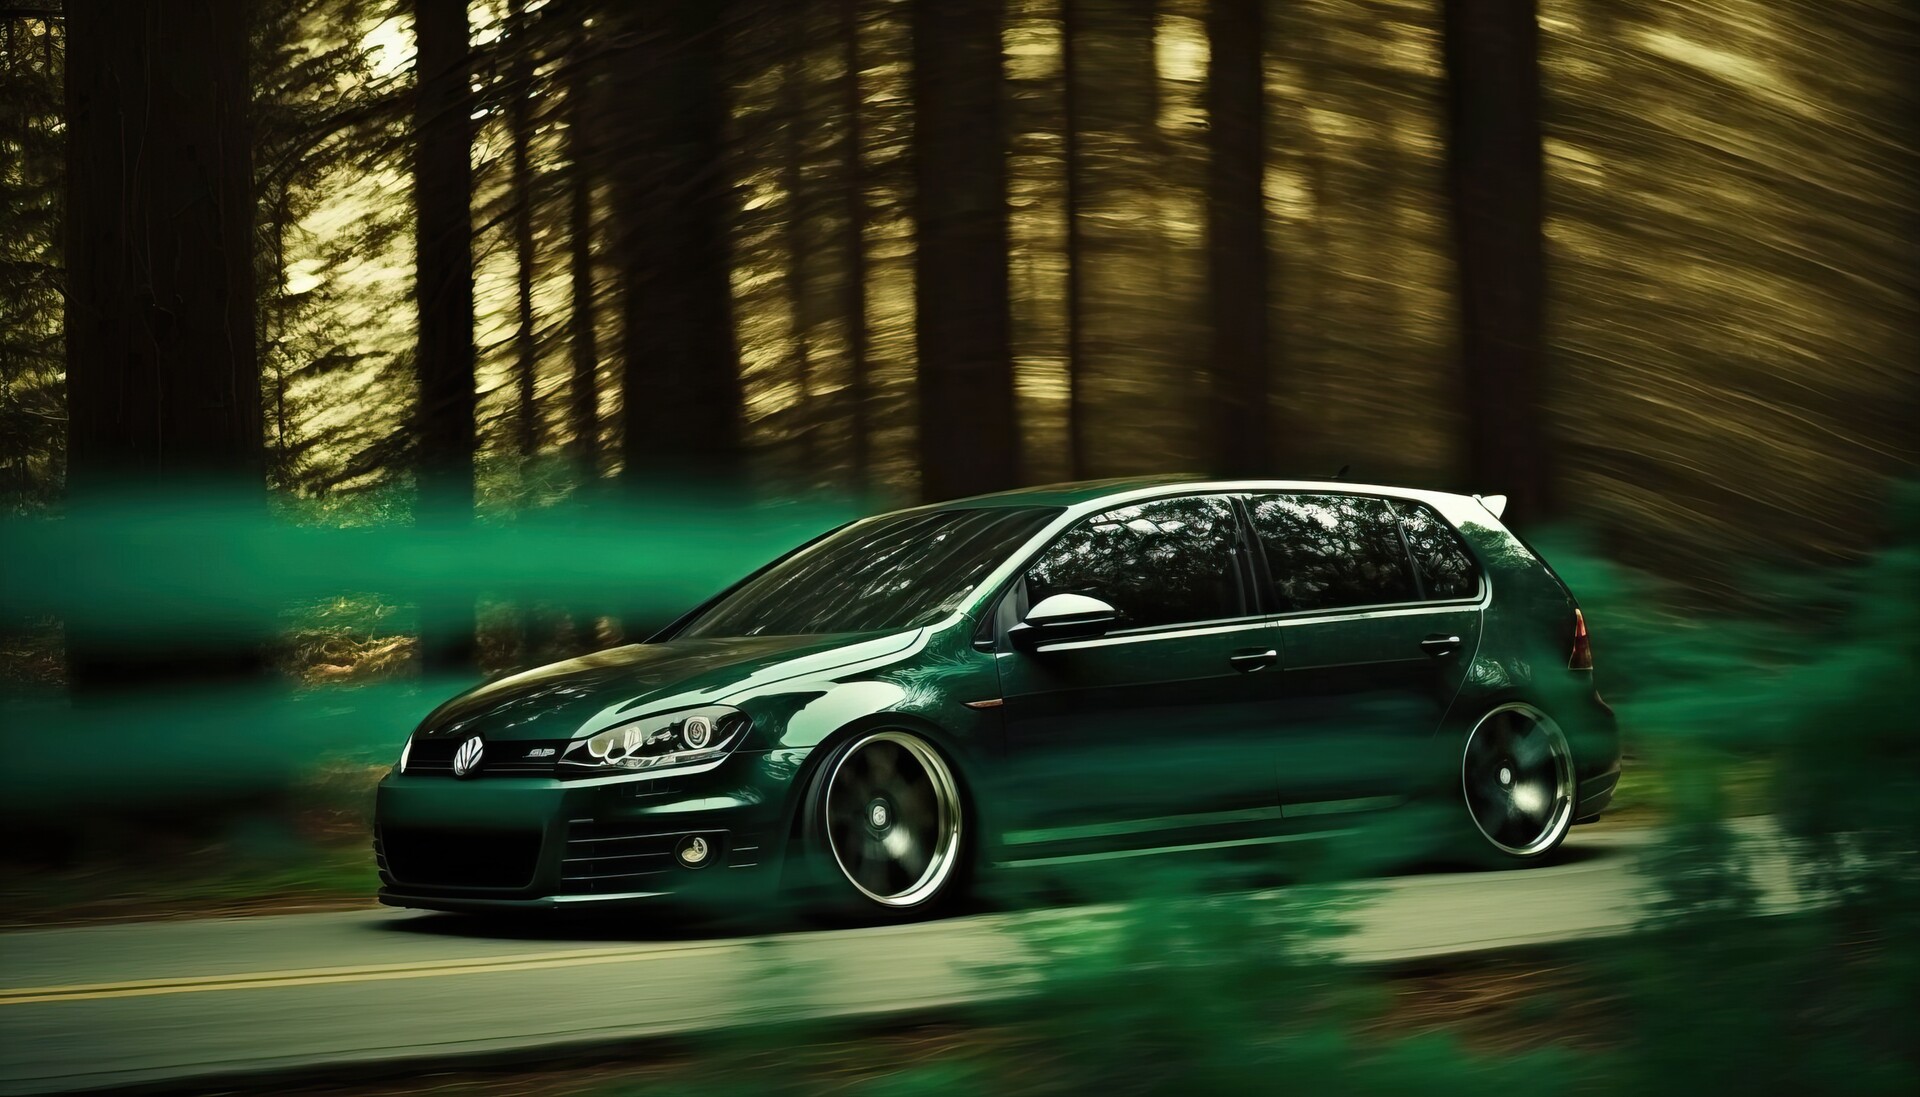 VW Golf 6 Tuning Wallpaper by vwstyle on DeviantArt